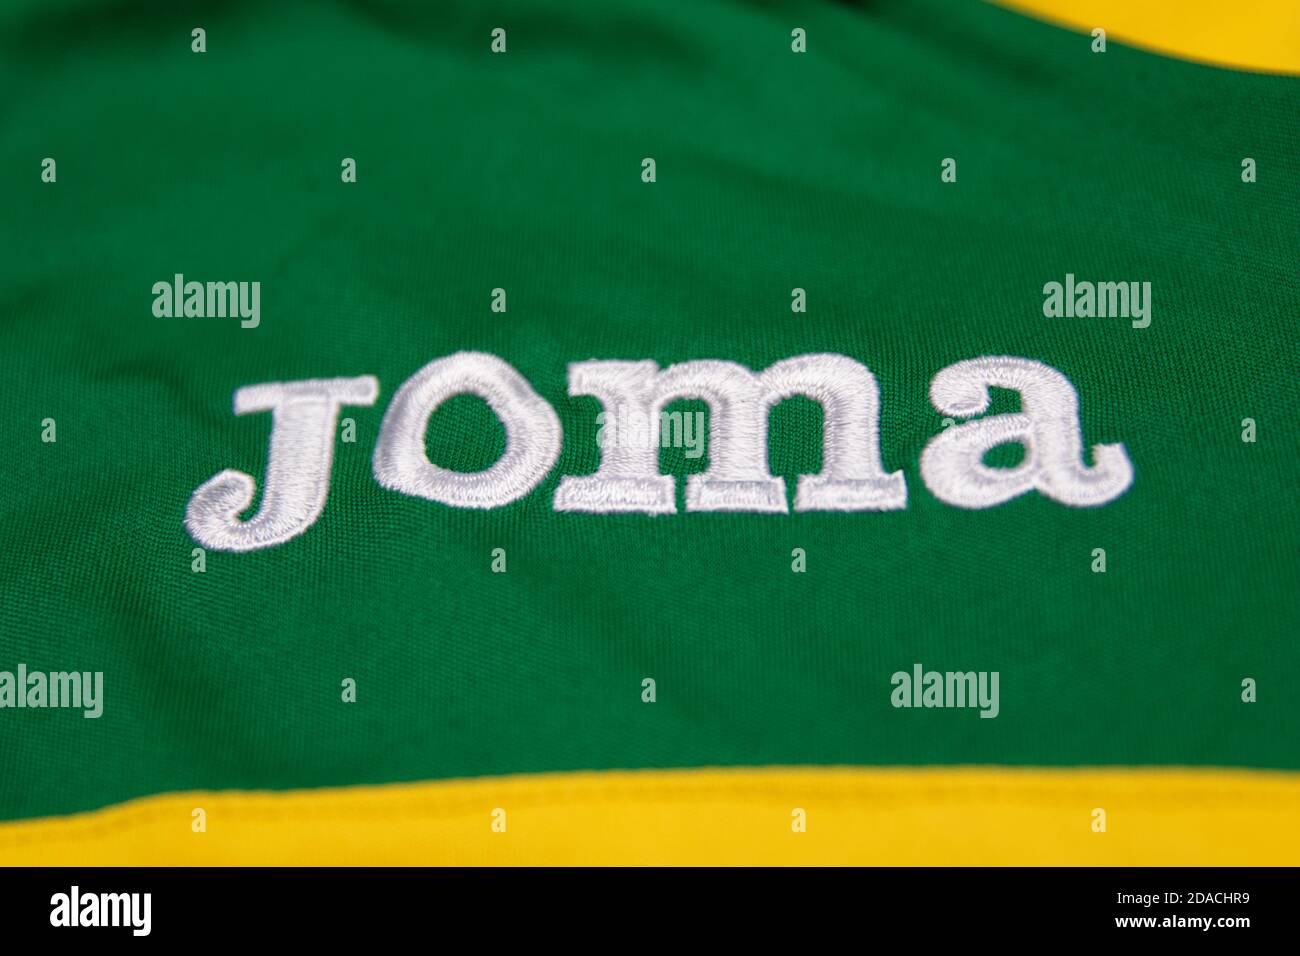 White Joma logo embroidered on a green and yellow sports shirt Stock Photo  - Alamy